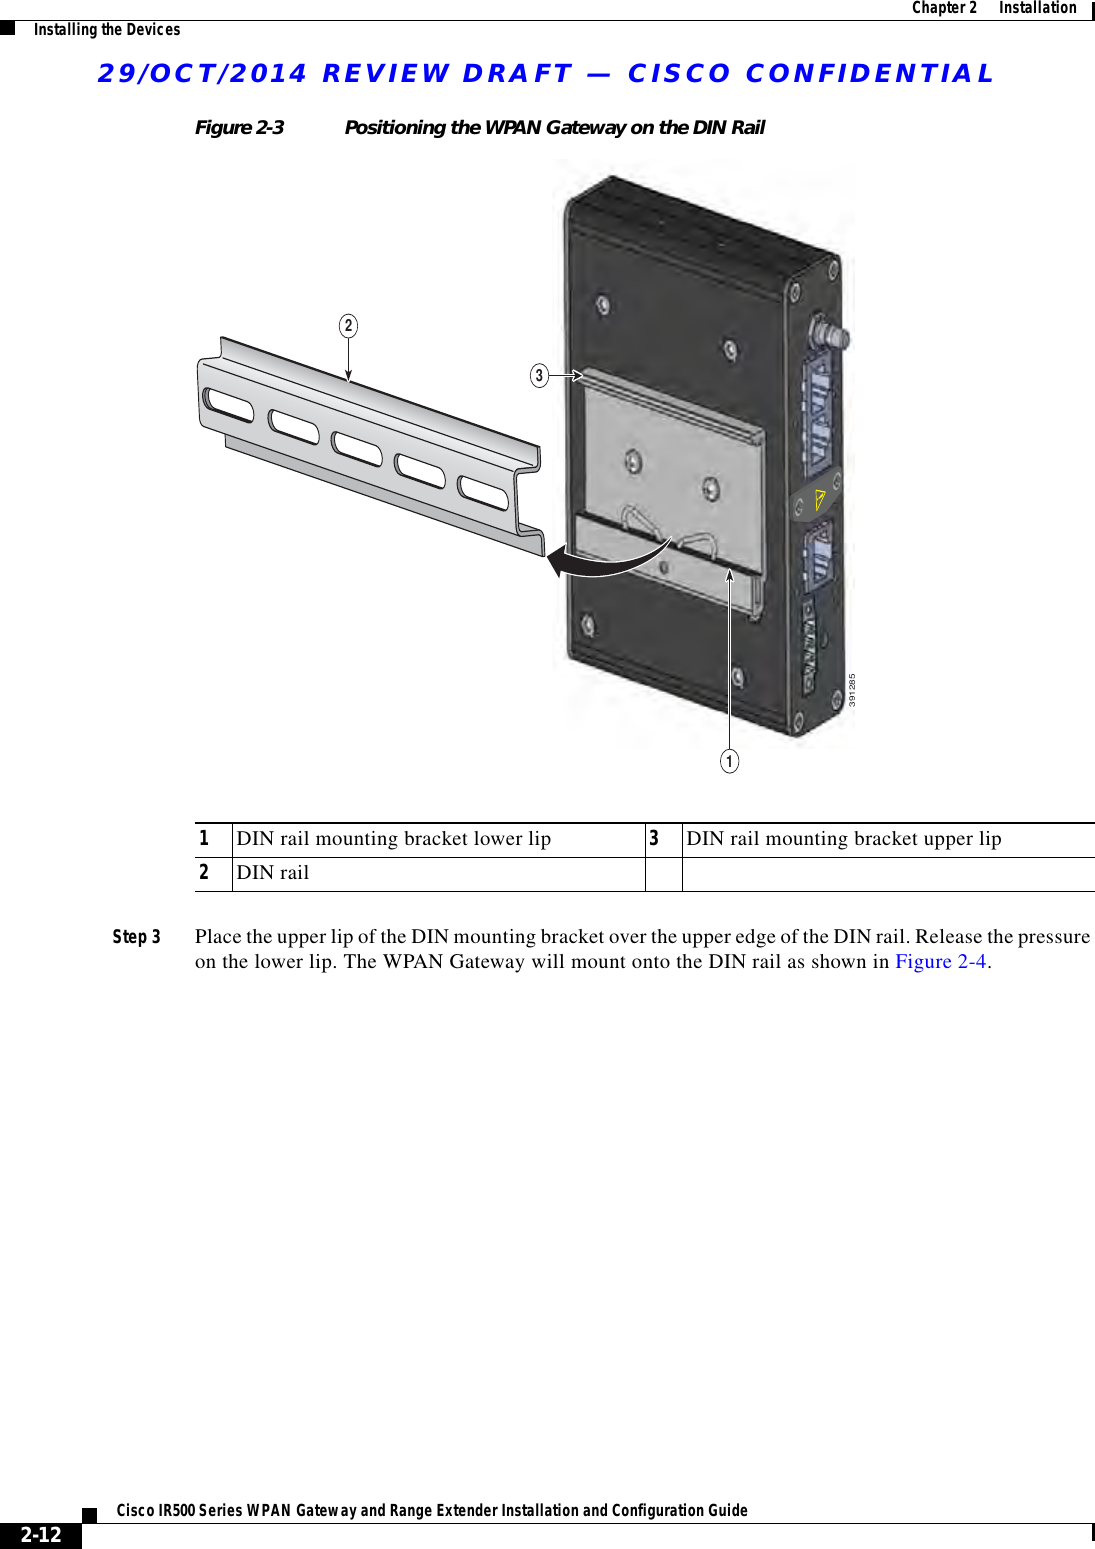 29/OCT/2014 REVIEW DRAFT — CISCO CONFIDENTIAL2-12Cisco IR500 Series WPAN Gateway and Range Extender Installation and Configuration Guide  Chapter 2      Installation Installing the DevicesFigure 2-3 Positioning the WPAN Gateway on the DIN Rail1339128521DIN rail mounting bracket lower lip 3DIN rail mounting bracket upper lip2DIN railStep 3 Place the upper lip of the DIN mounting bracket over the upper edge of the DIN rail. Release the pressure on the lower lip. The WPAN Gateway will mount onto the DIN rail as shown in Figure 2-4.